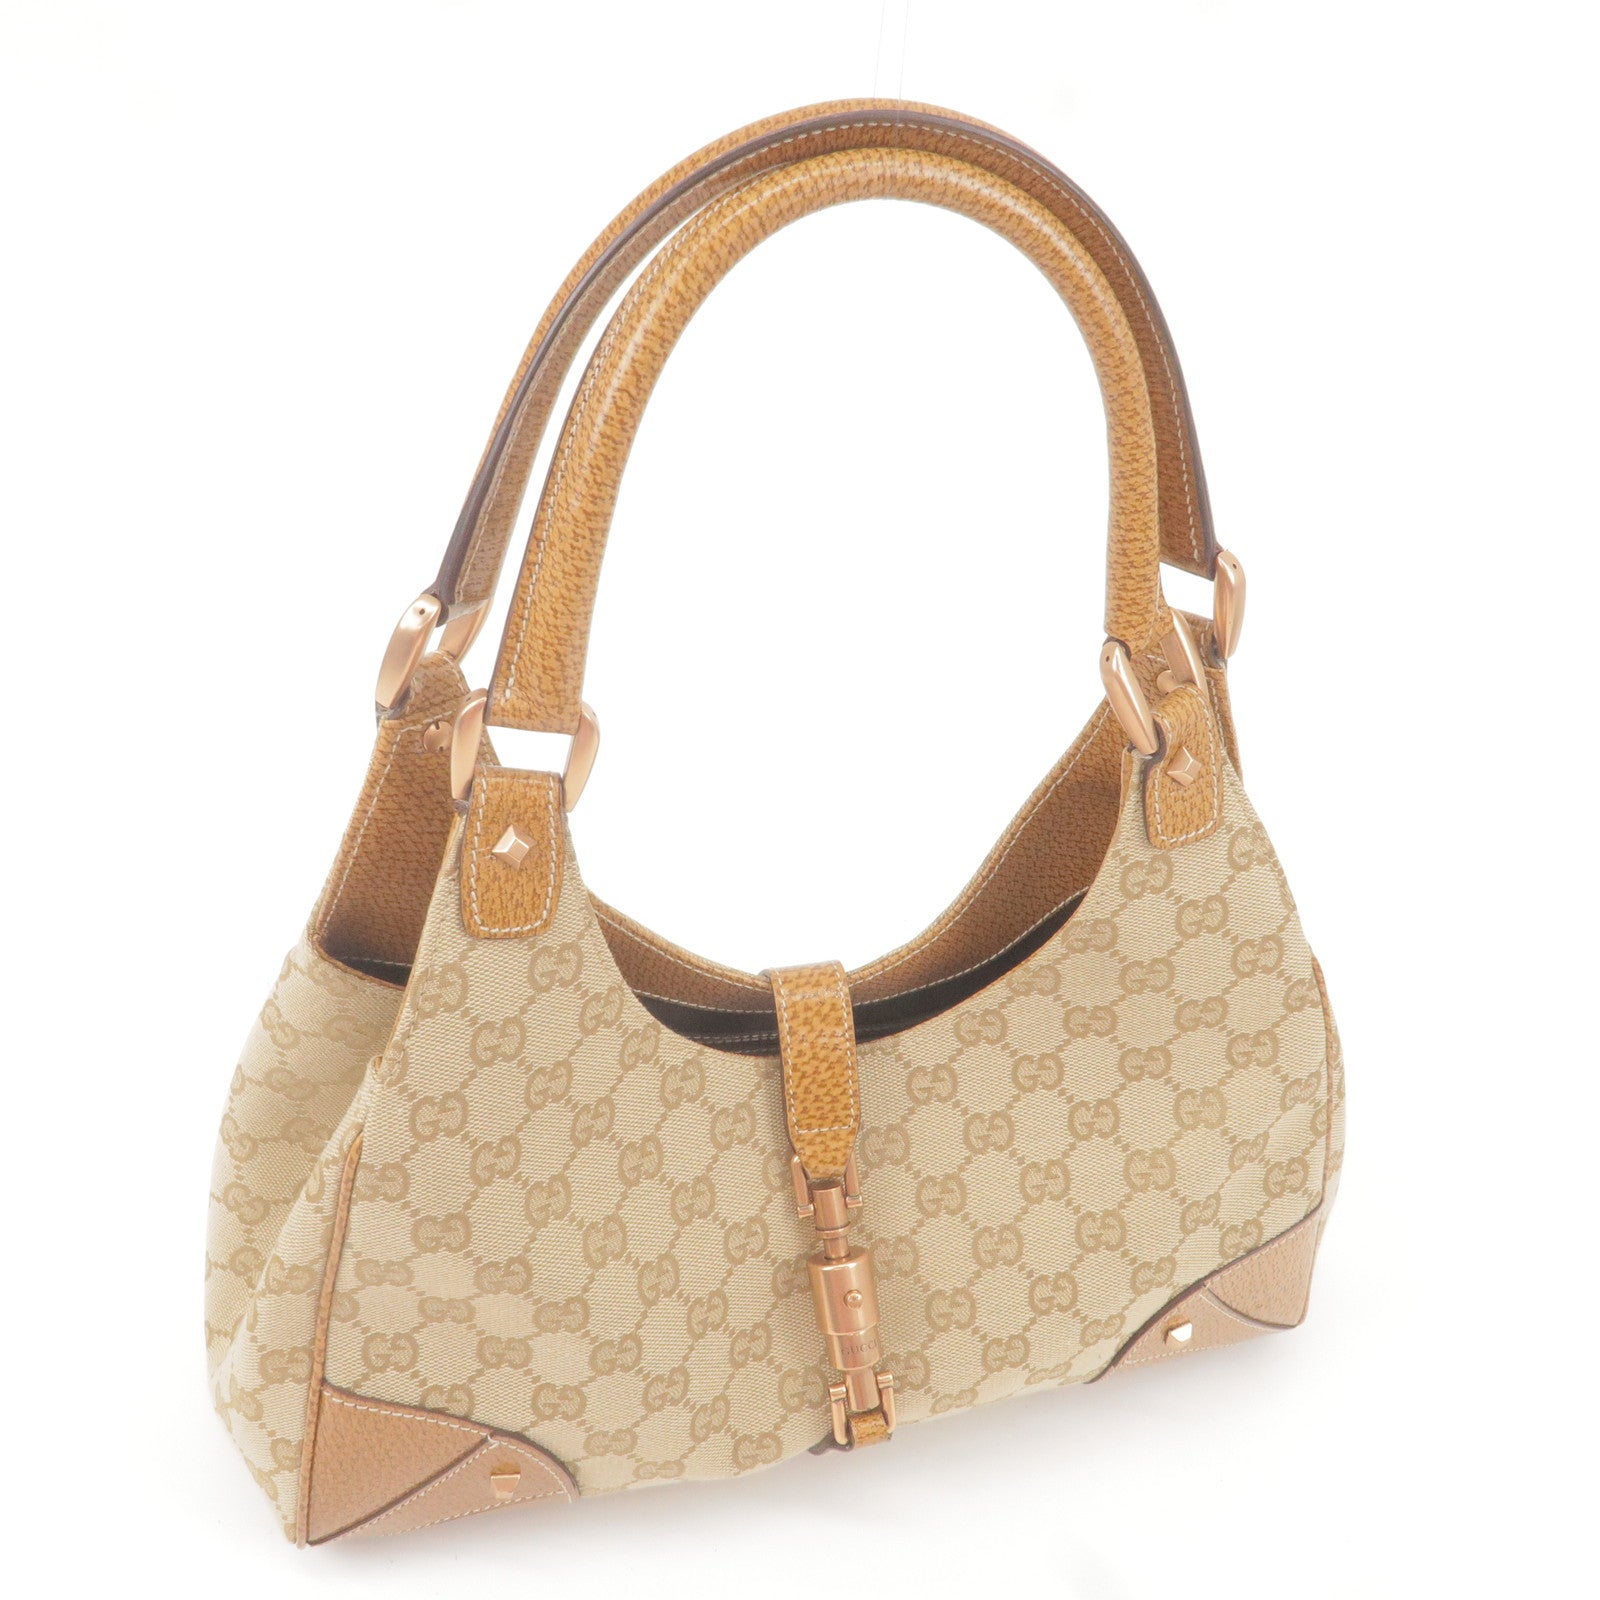 Gucci Jackie Bag in Light Yellow / Beige Leather -  Hong Kong